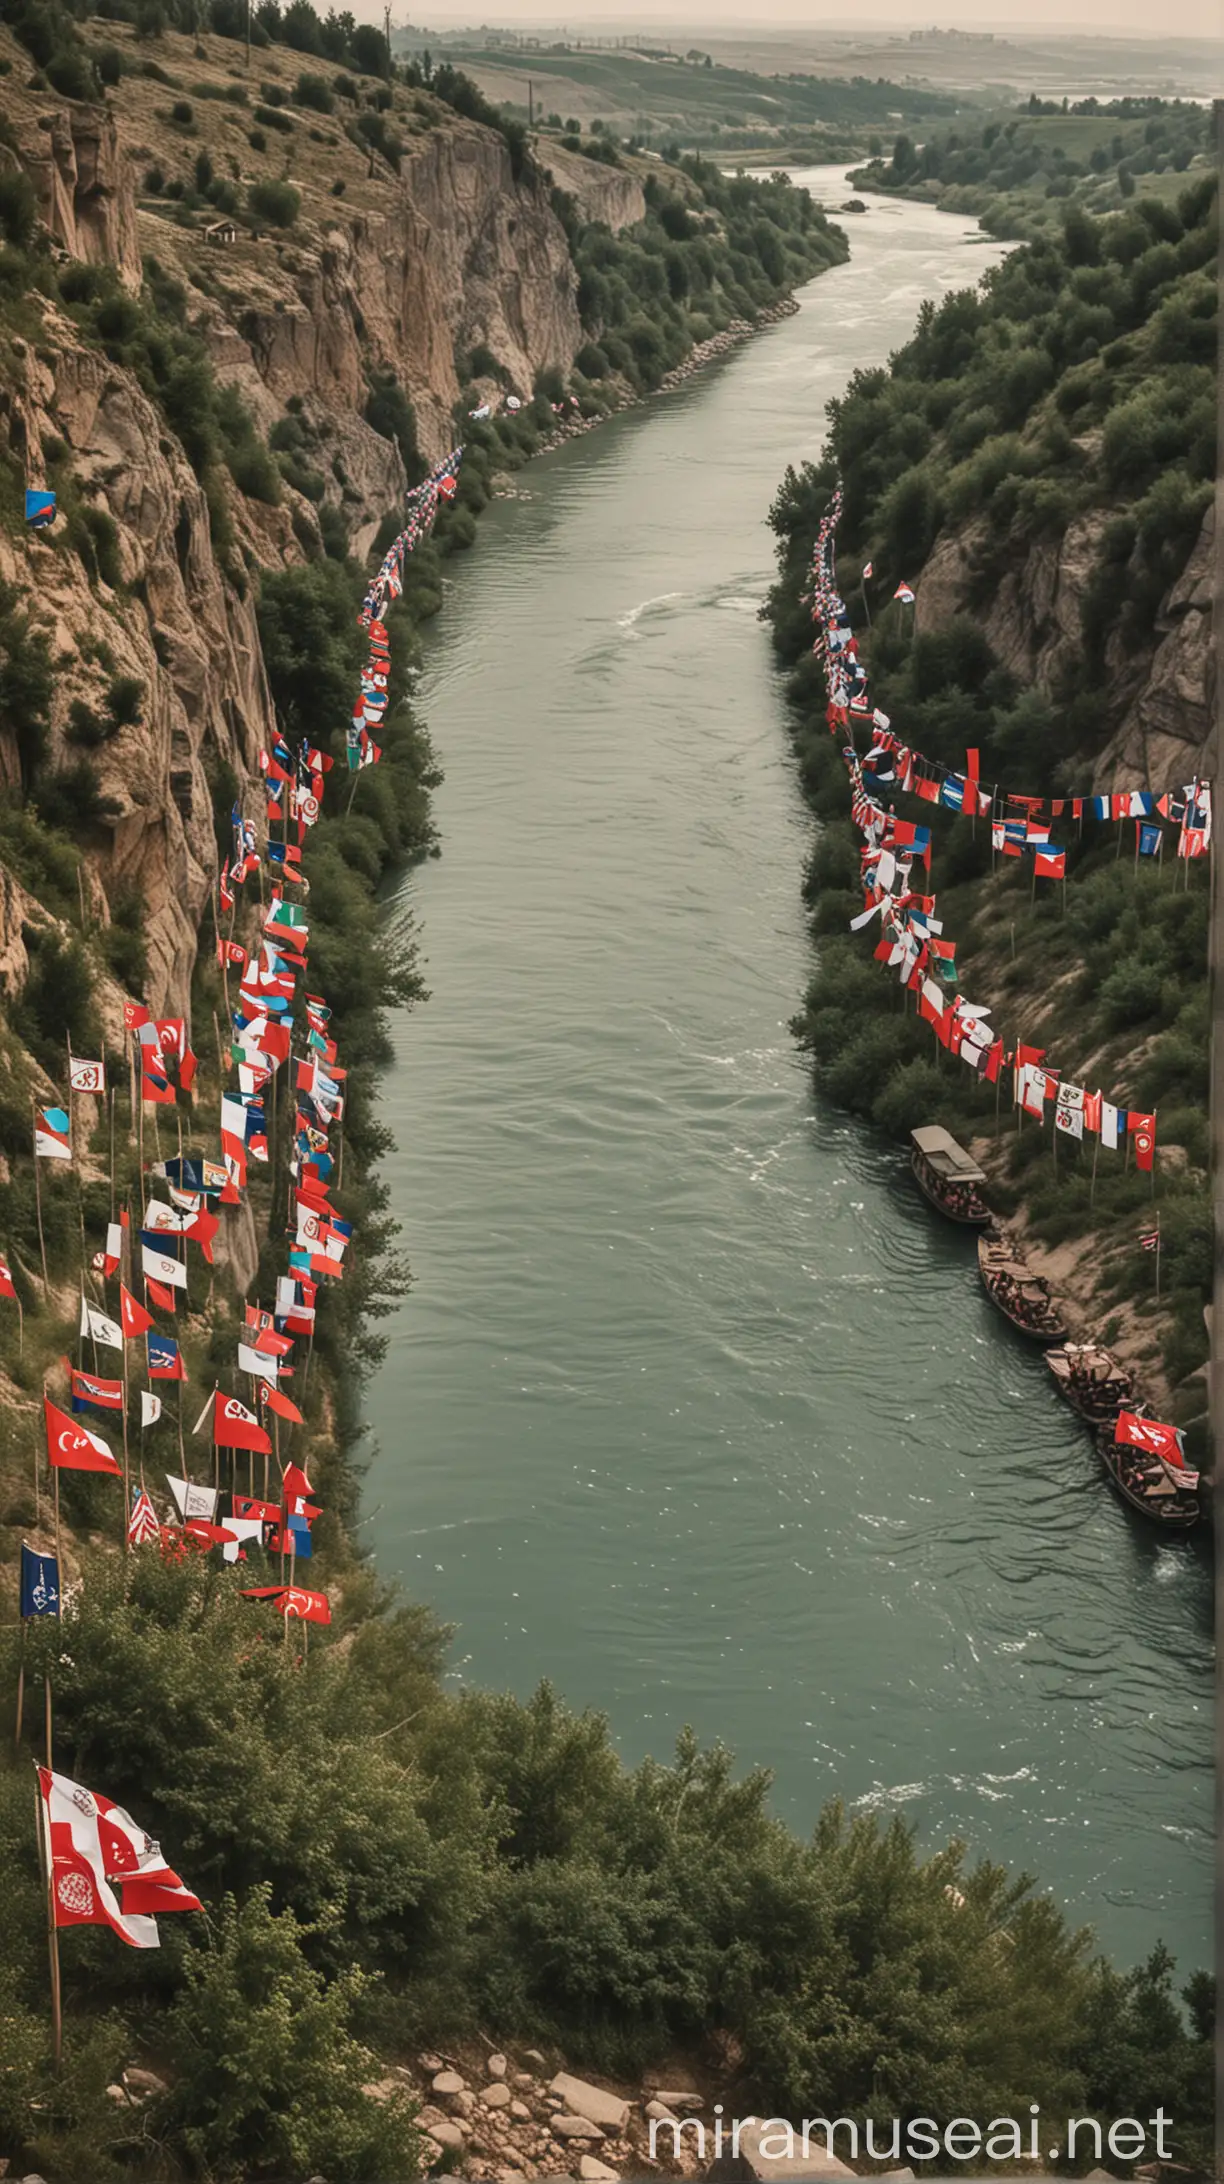 Purut River Flowing Amid Ottoman and Russian Flags